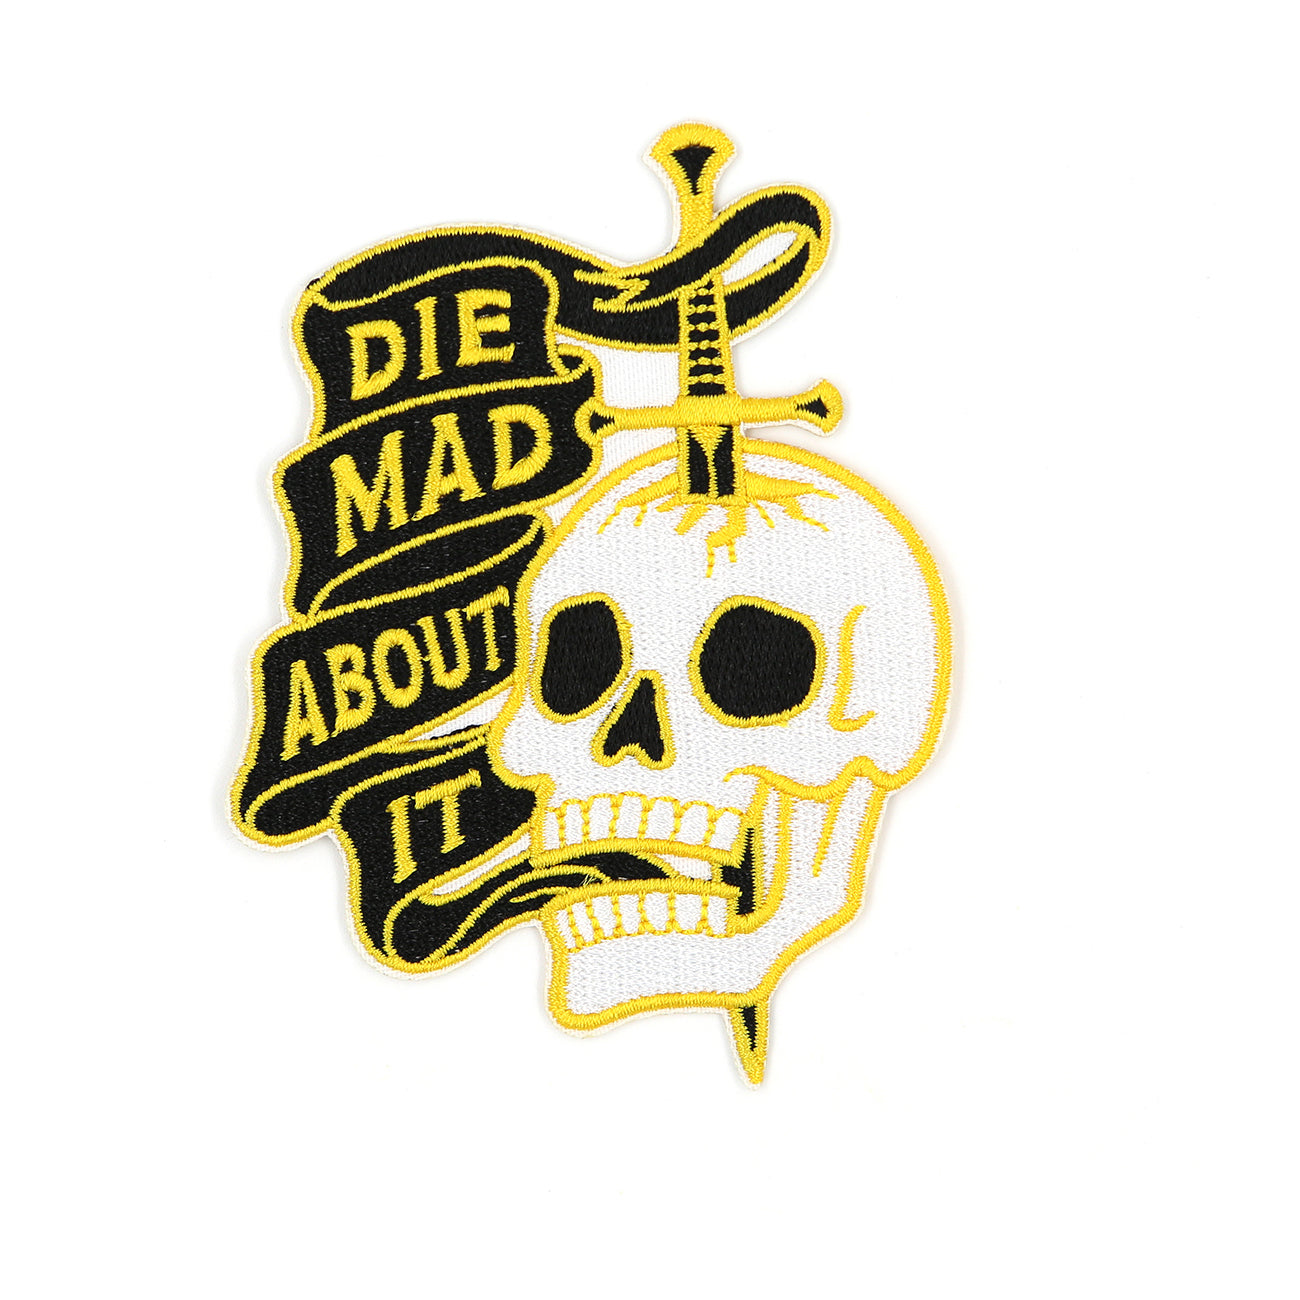 Front view of Die Mad About It sword through skull patch on white background.